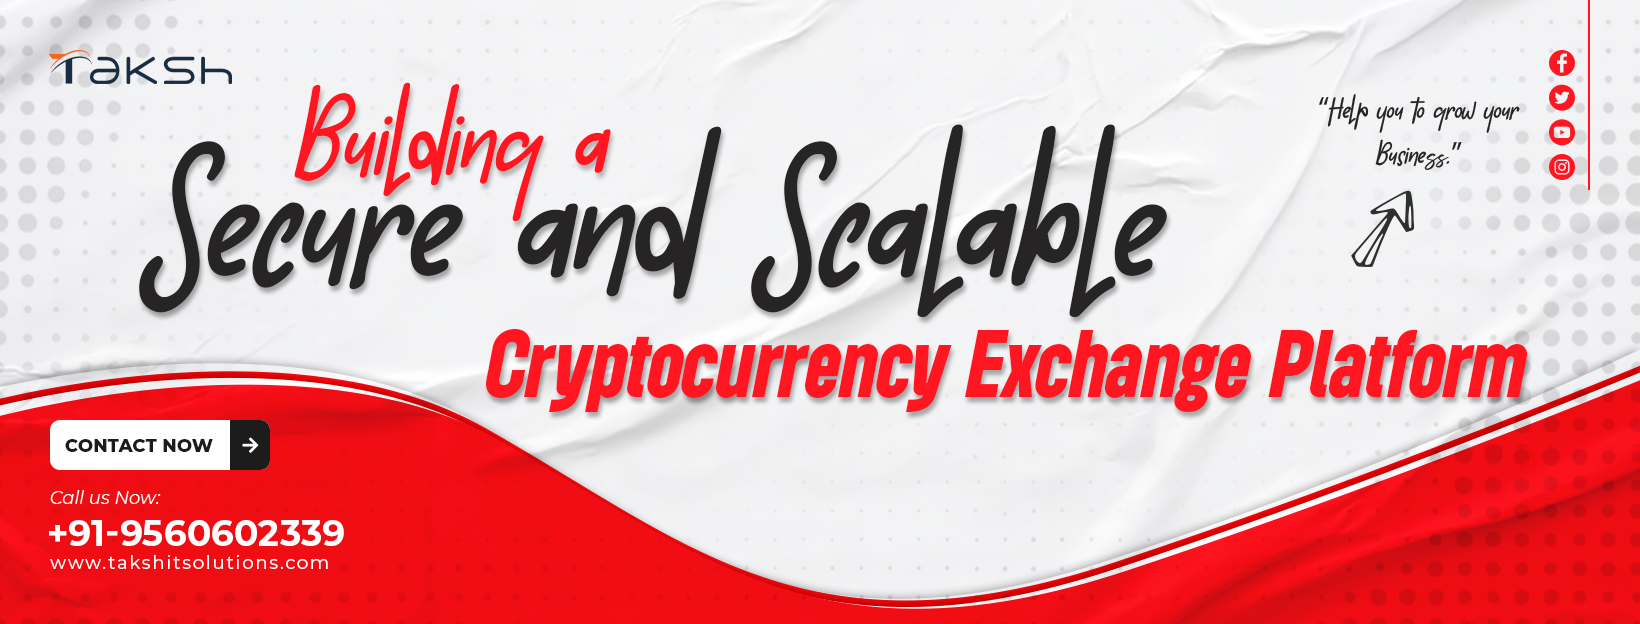 Secure and Scalable Cryptocurrency Exchange Platform || Taksh It Solutions